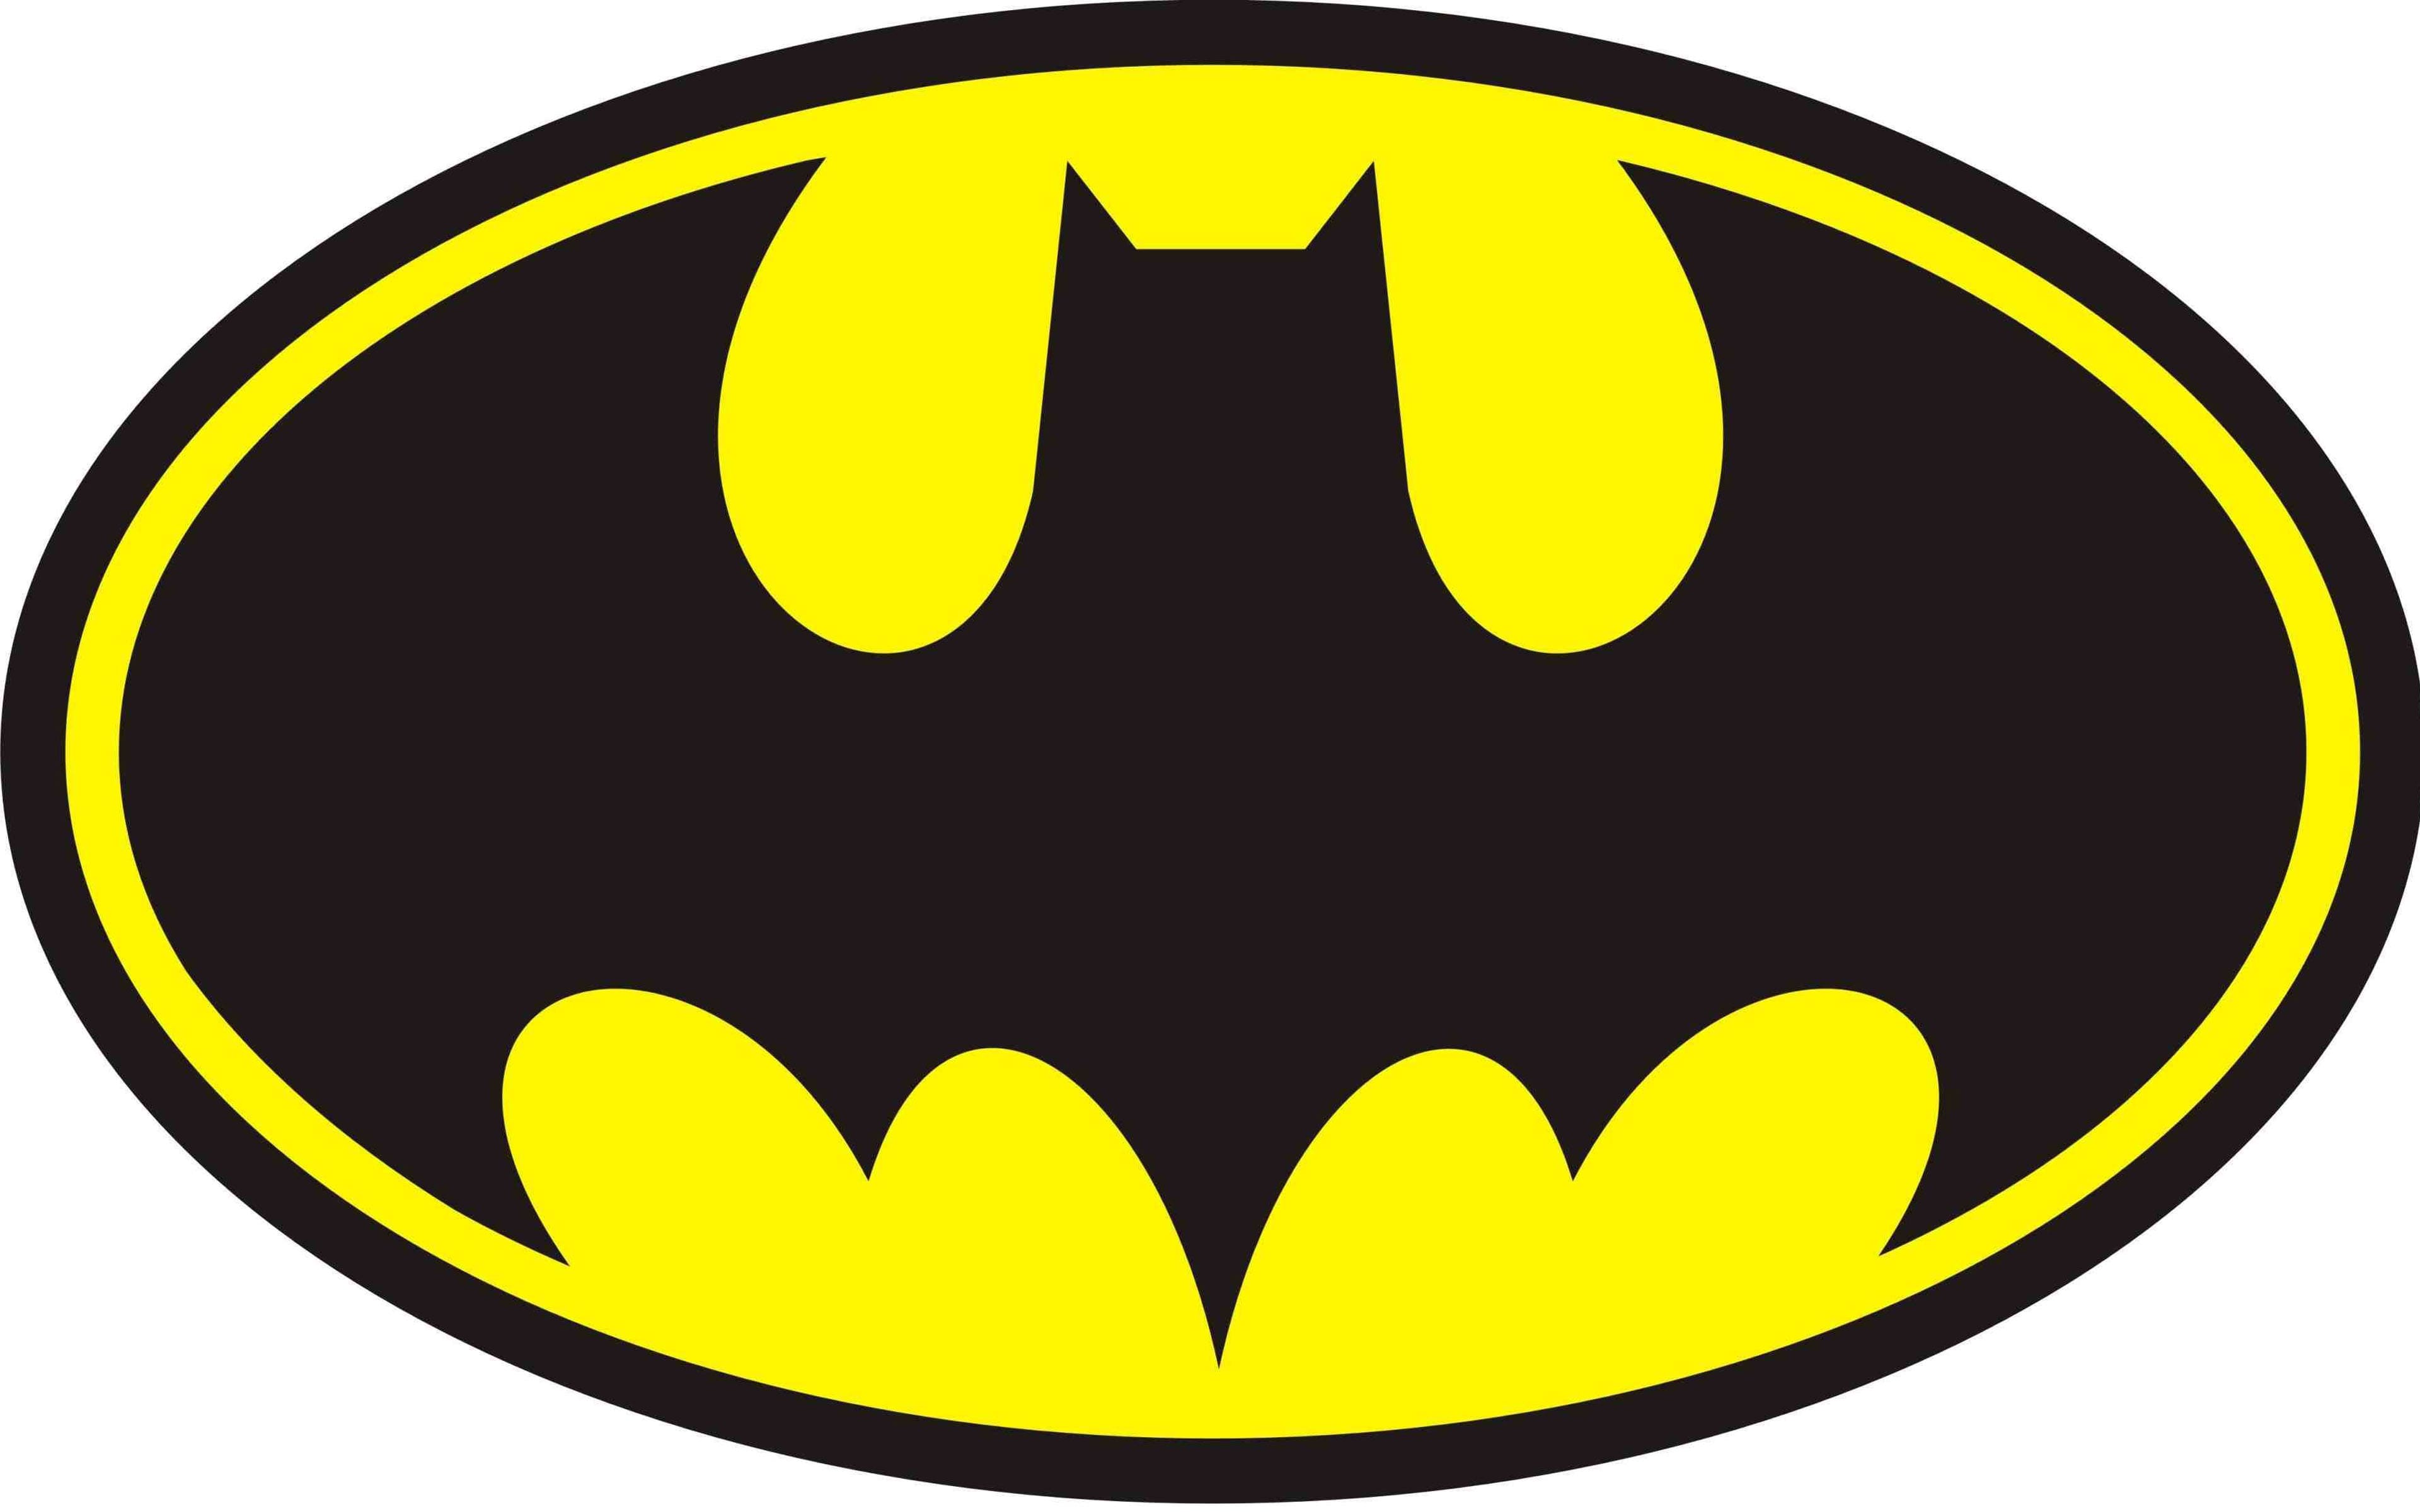 Lego Batman logo and symbol, meaning, history, PNG